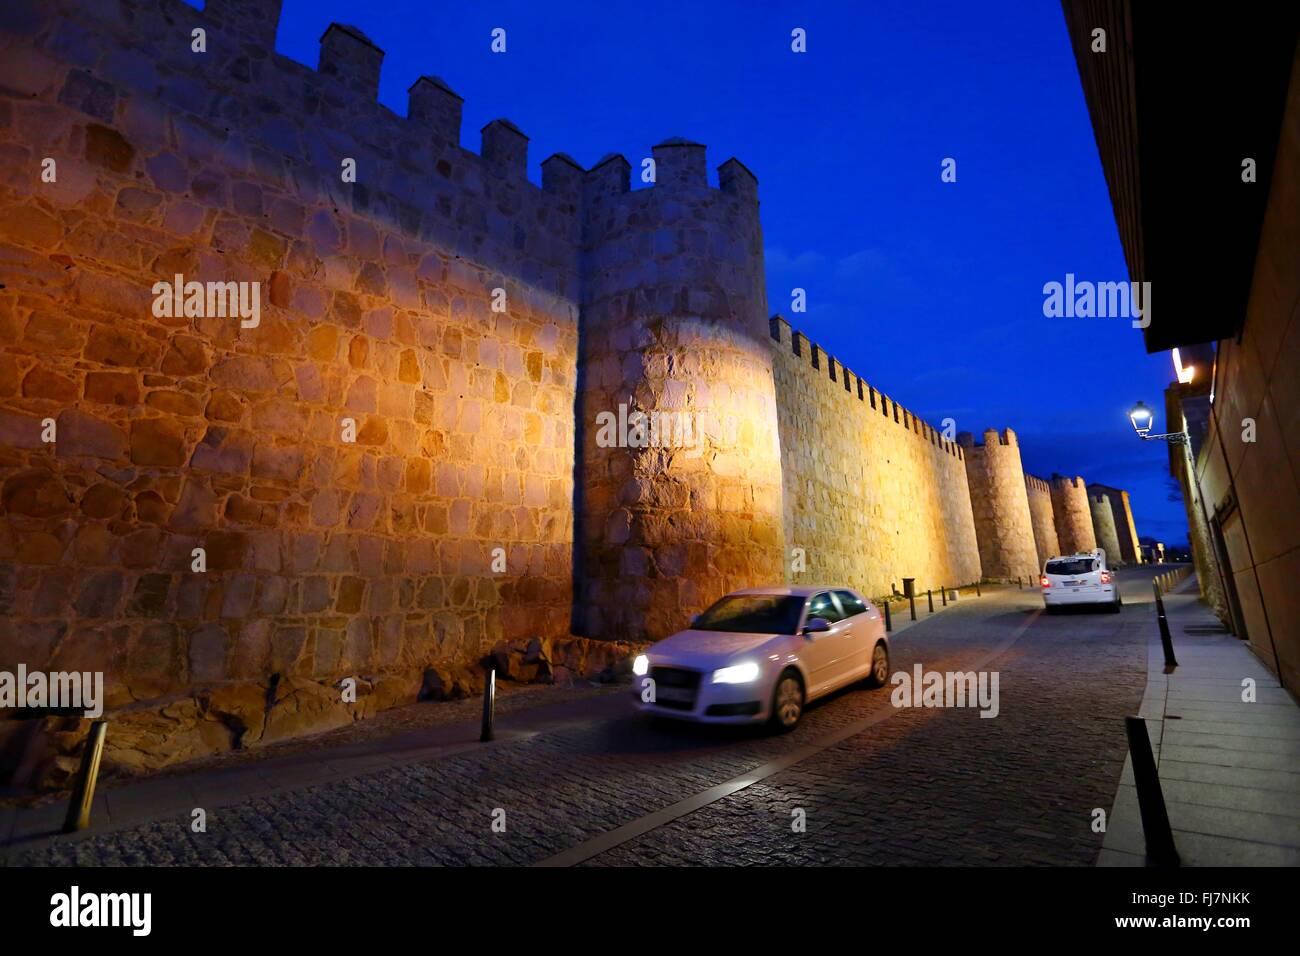 (160301) -- BRUSSELS, March 1, 2016 (Xinhua) -- Photo taken on Feb. 16, 2016 shows night view of the old town of Avila in Spain. The city of Avila is around 100 km to the north-west of Spain's capital city of Madrid. Founded in the 11th century to protect the Spanish territories from the Moors, this 'City of Saints and Stones', the old town of Avila has kept its medieval austerity. This purity of form can still be seen in the Gothic cathedral and the fortifications which, with their 82 semicircular towers and nine gates, are the most complete in Spain. The Old Town of Avila with its Extra-Muro Stock Photo